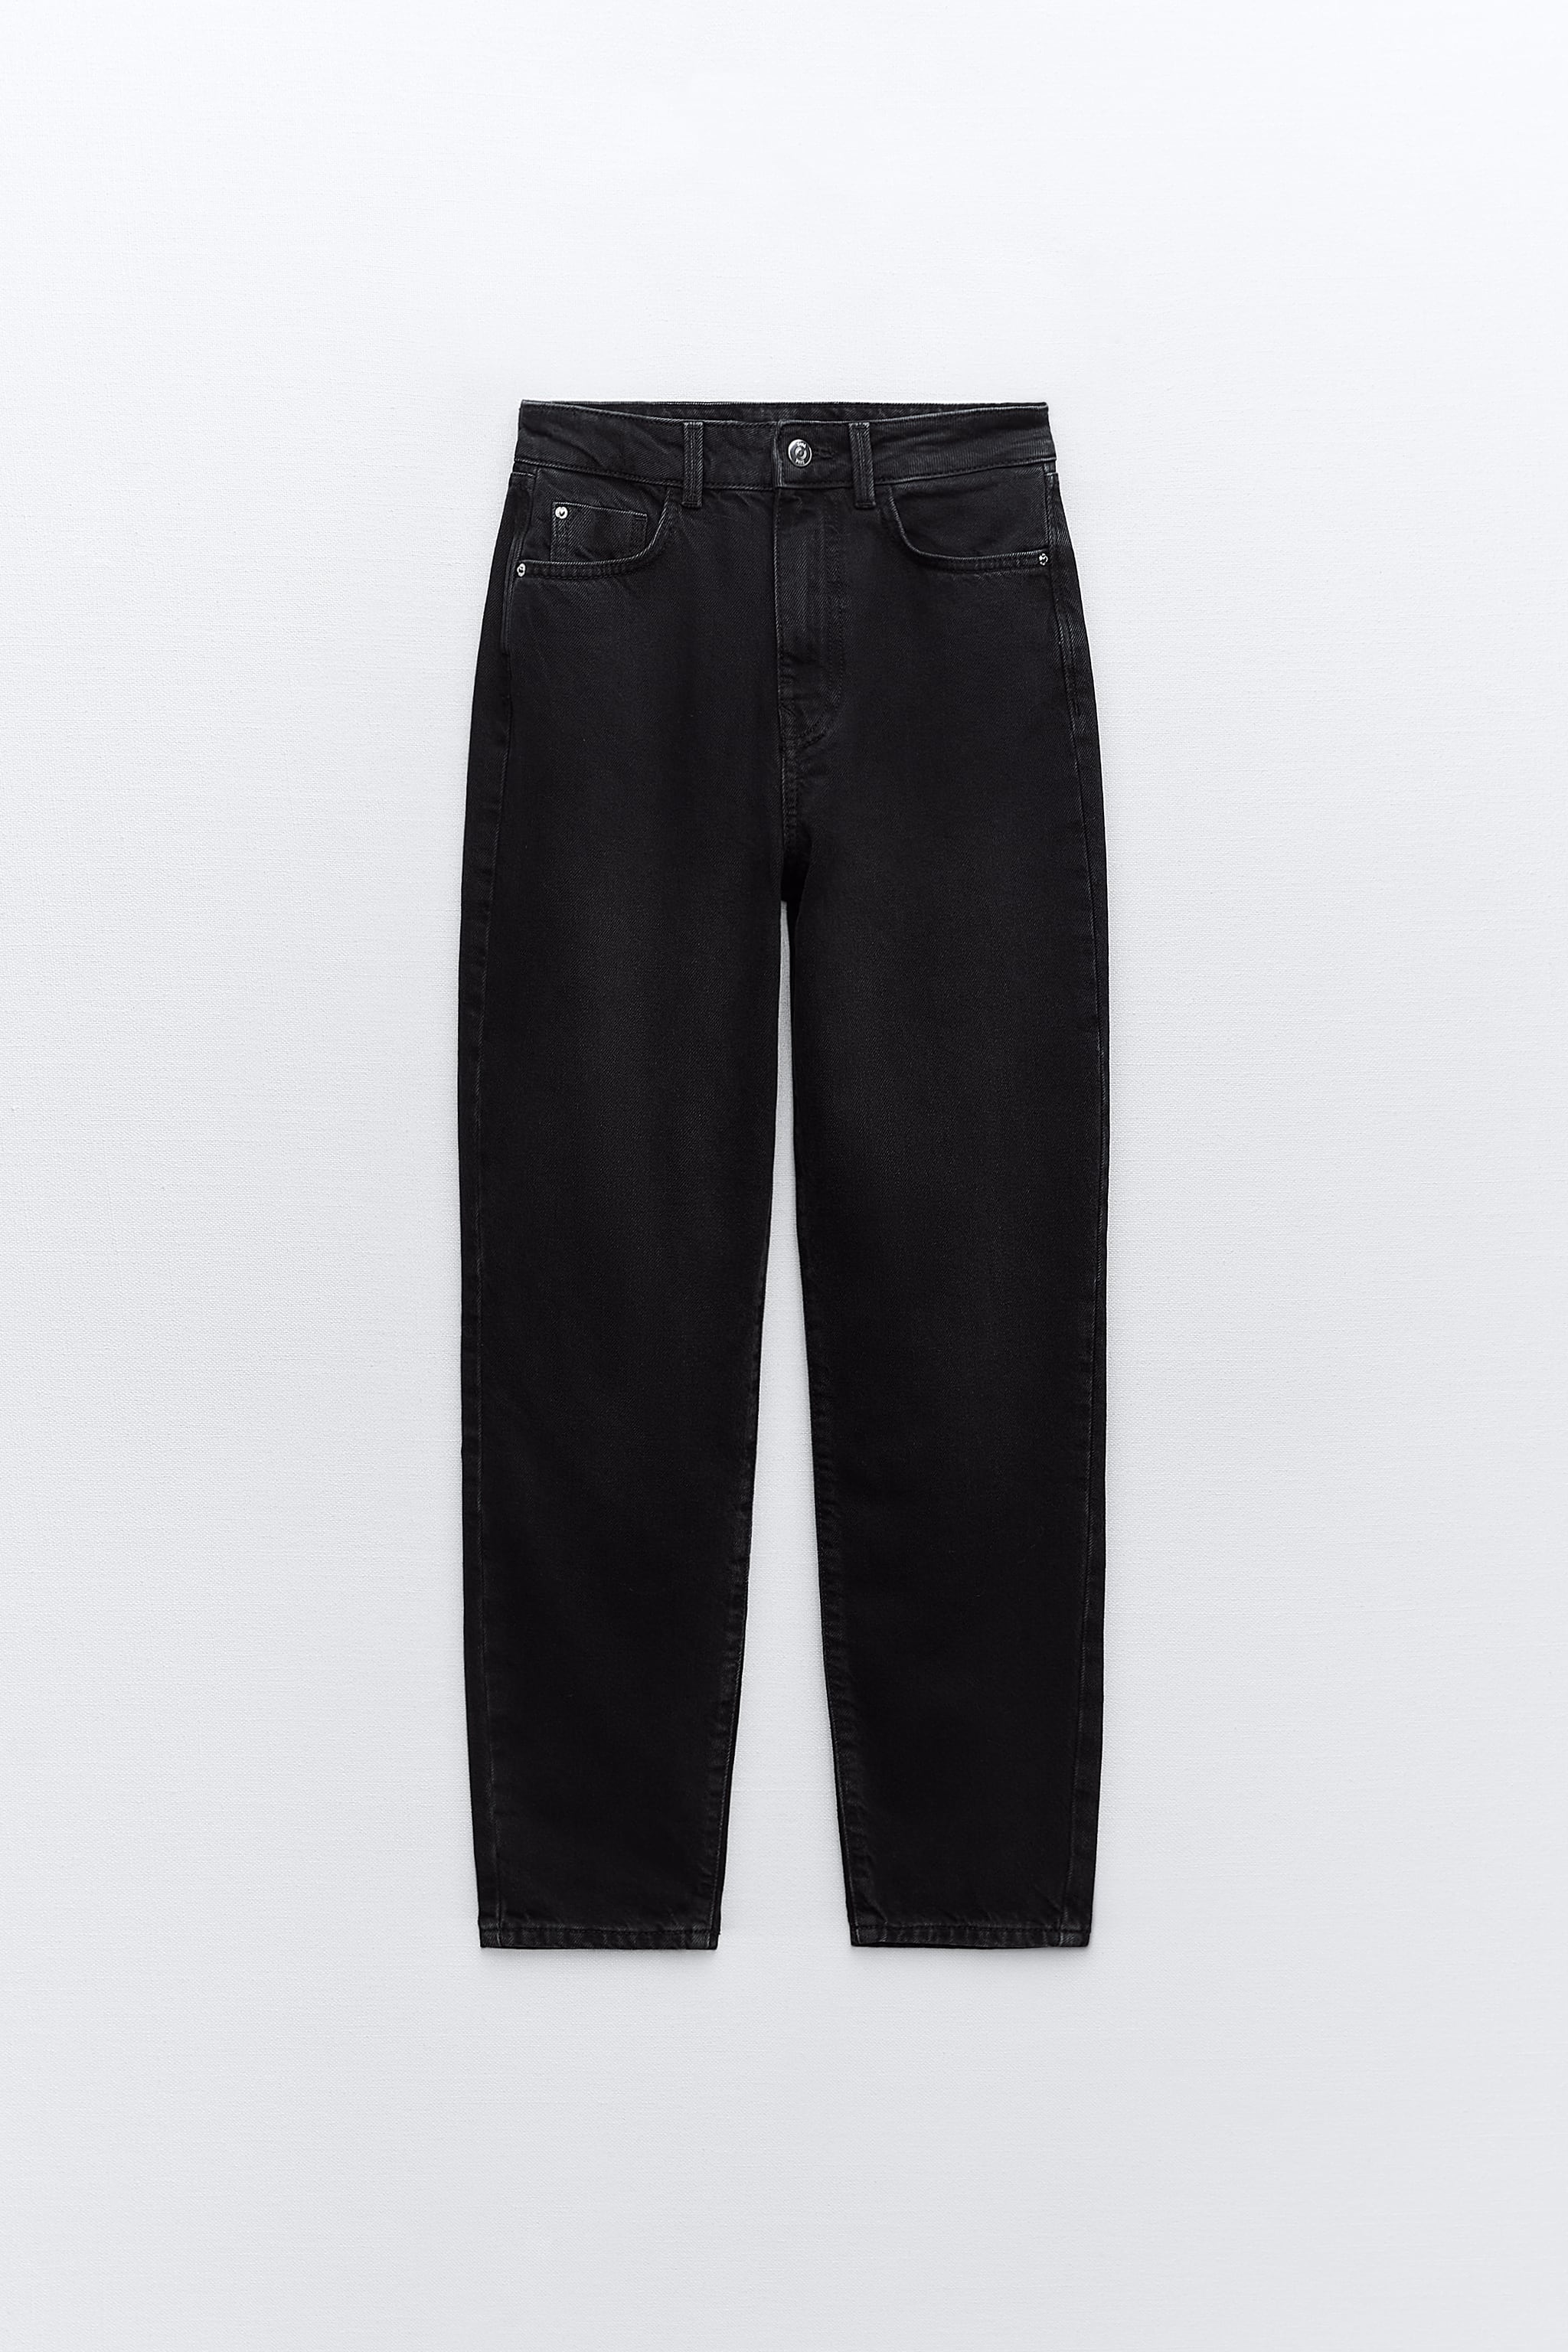 Z1975 MOM FIT JEANS WITH A HIGH WAIST